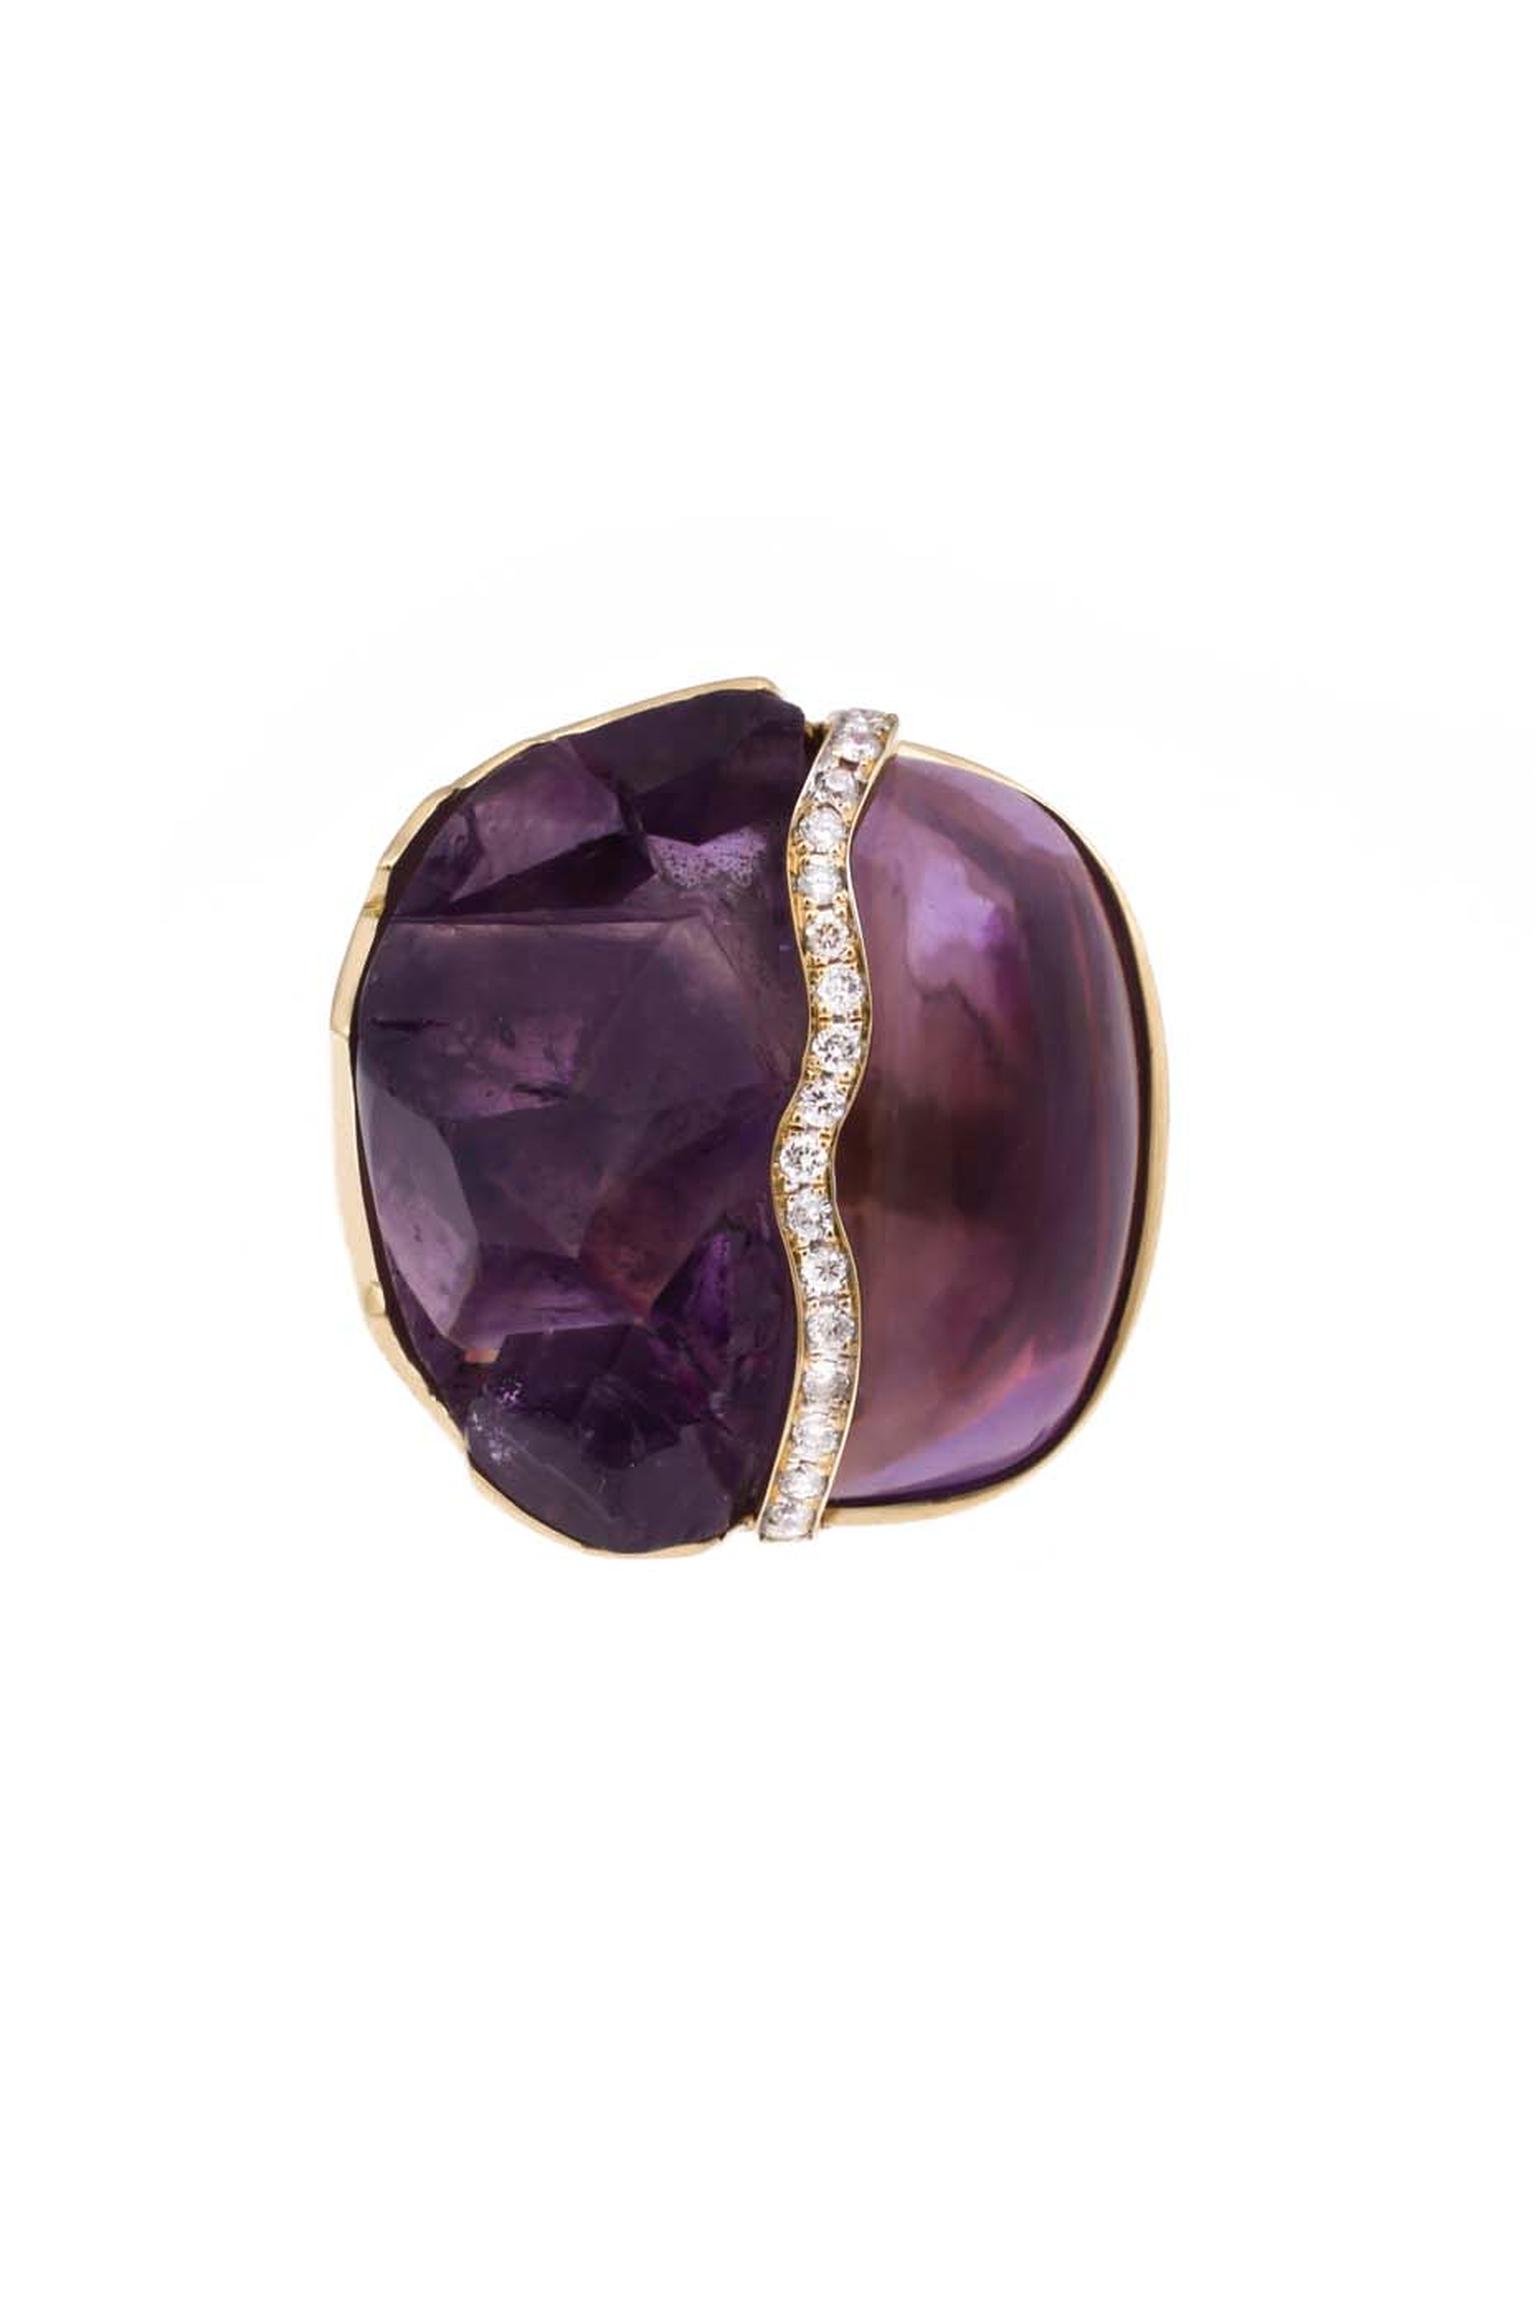 Kara Ross gold Petra split ring with raw and smooth amethyst divided by a row of diamonds